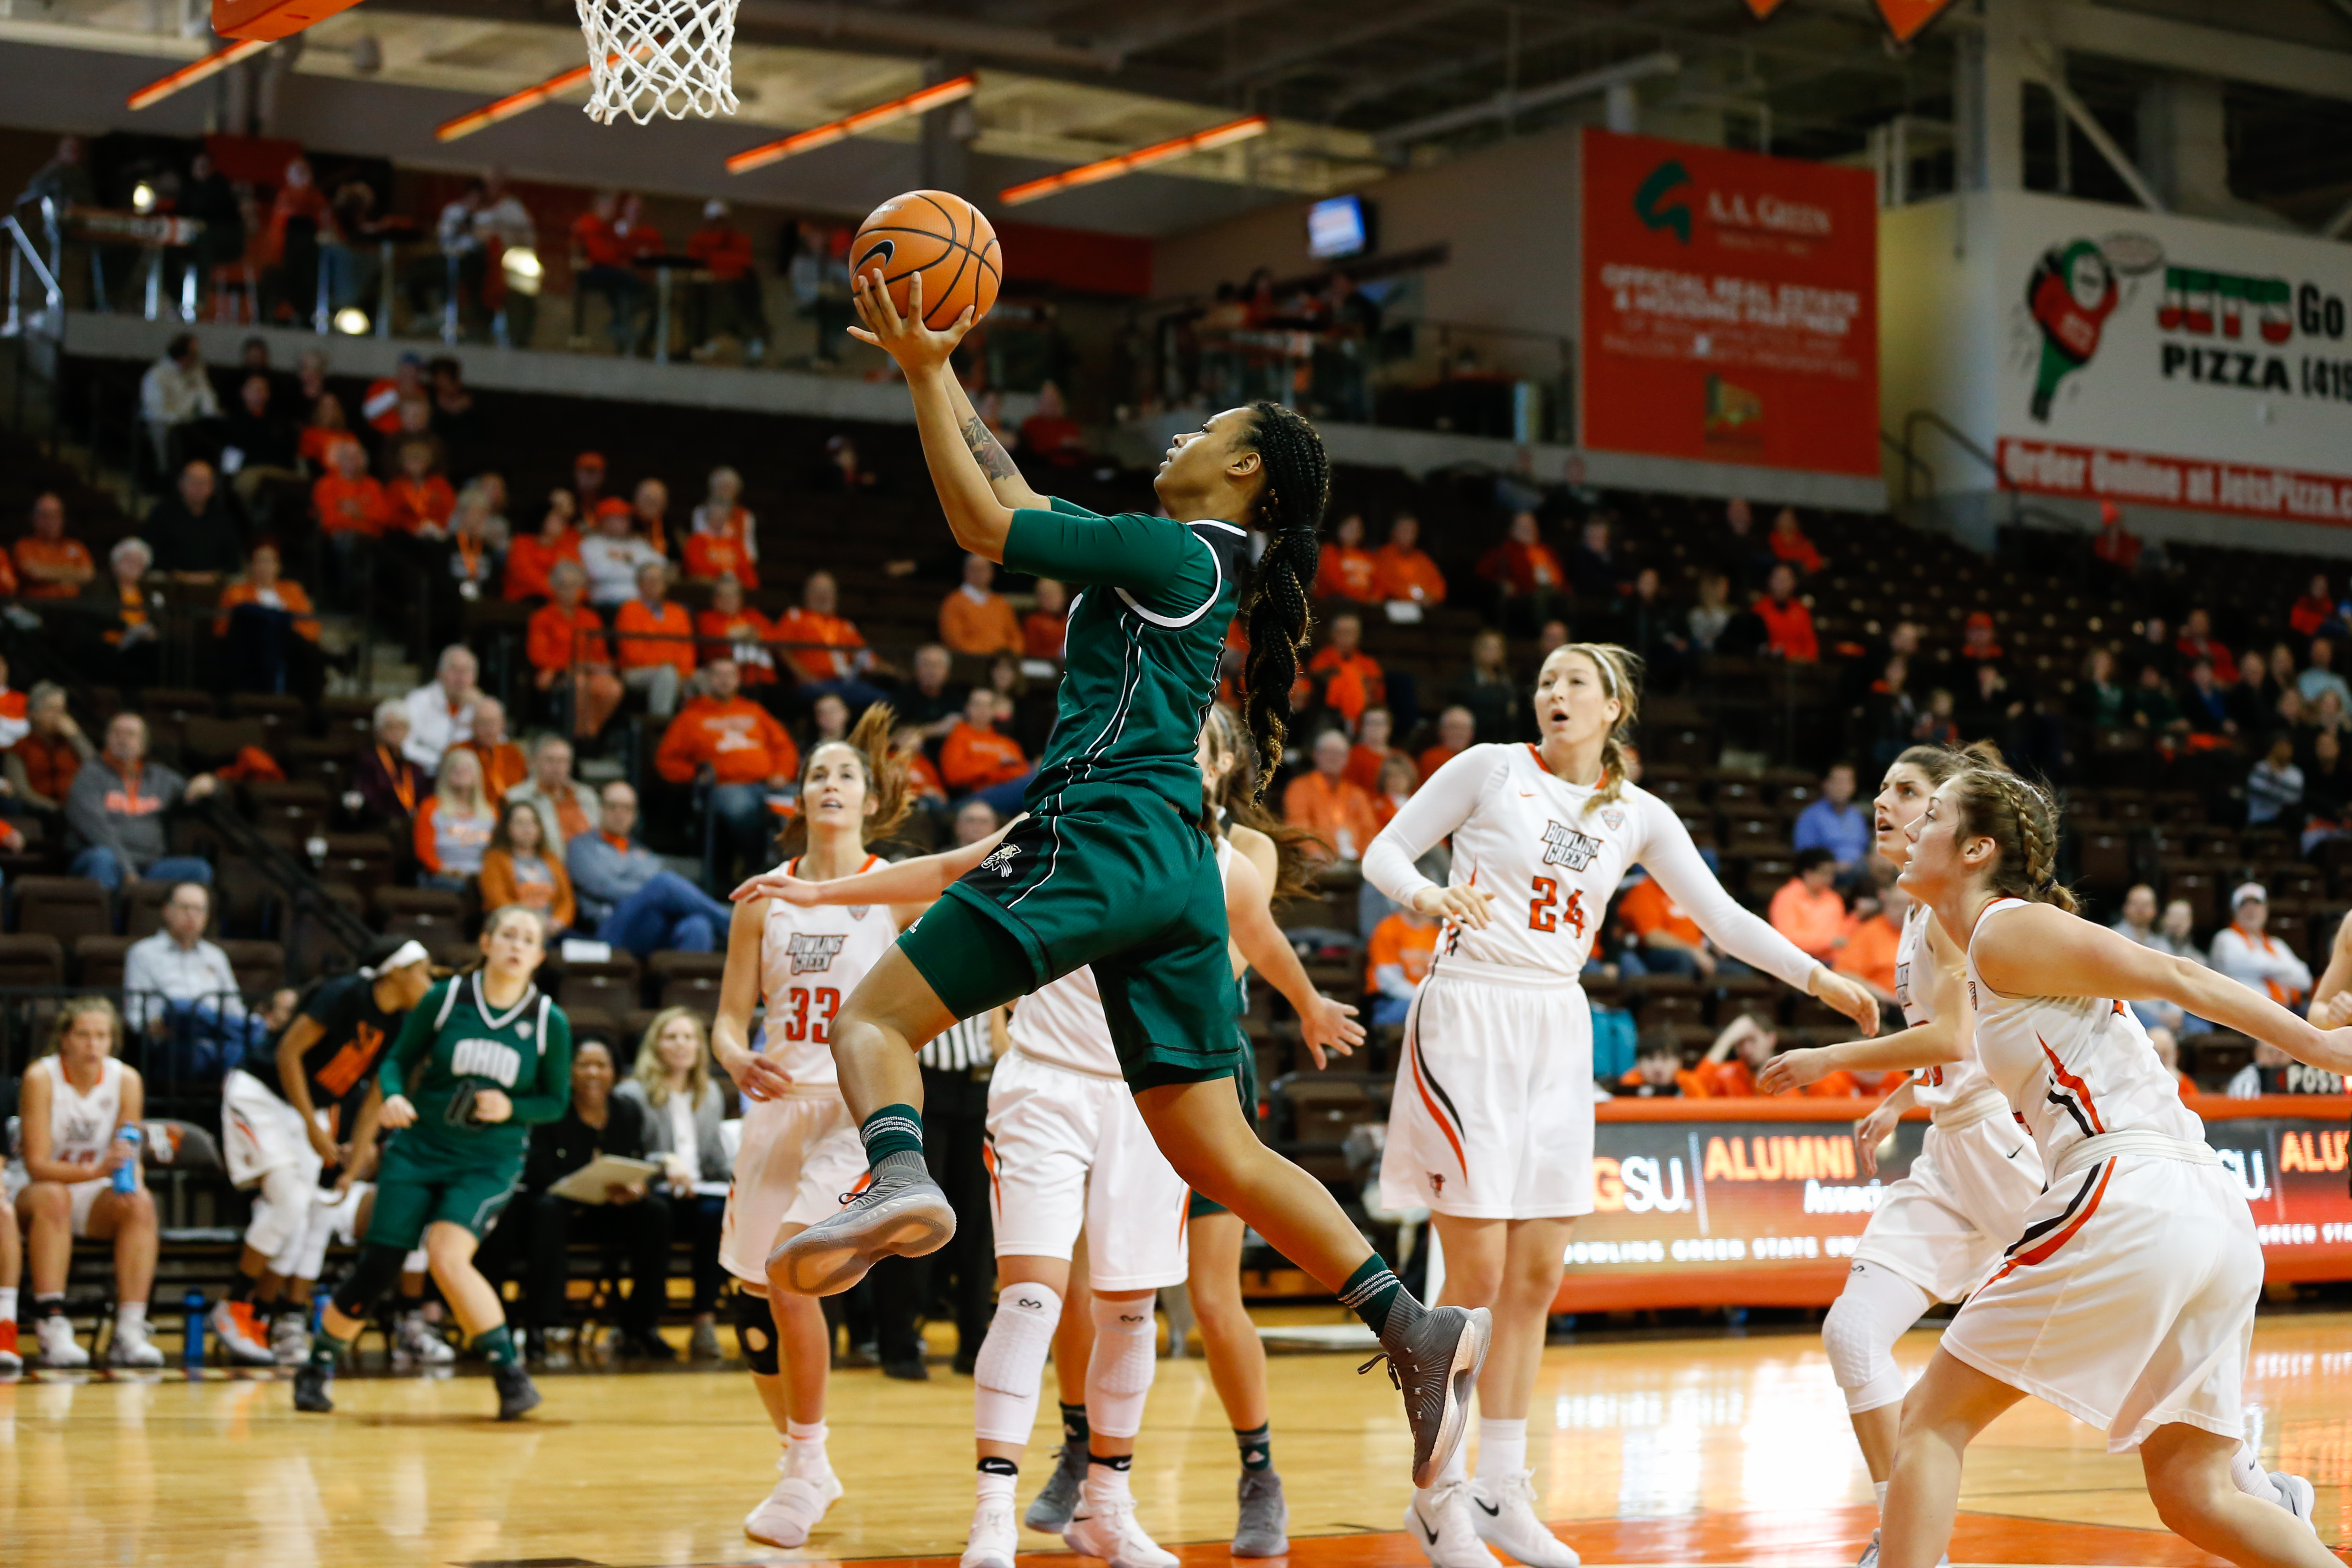 COLLEGE BASKETBALL: JAN 20 Women’s - Ohio at Bowling Green